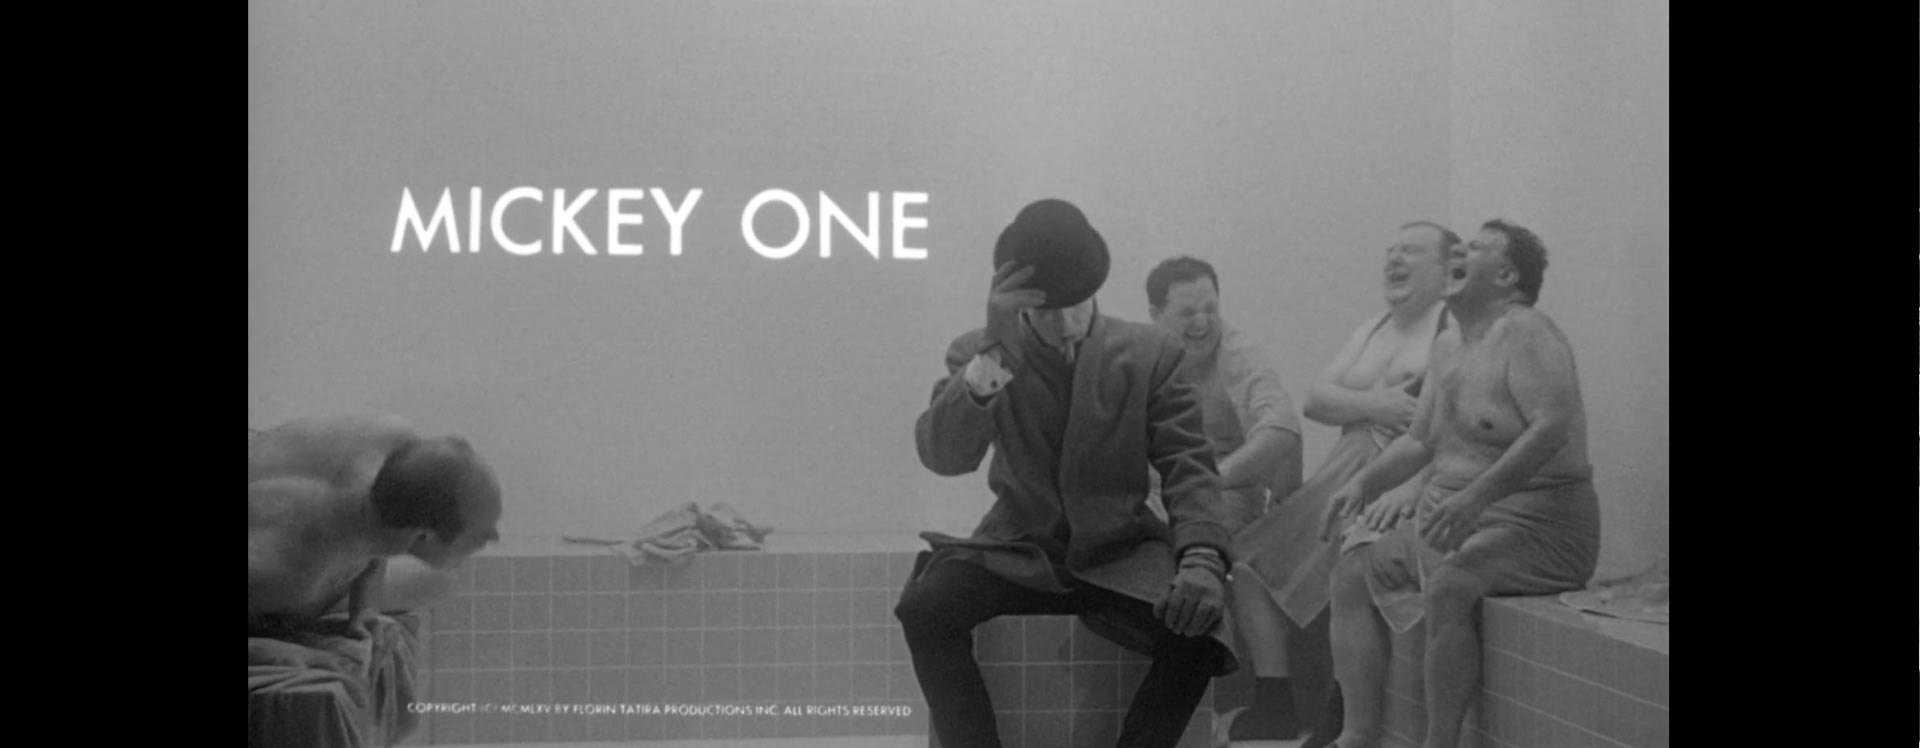 Still from the opening credits for Arthur Penn's Mickey One